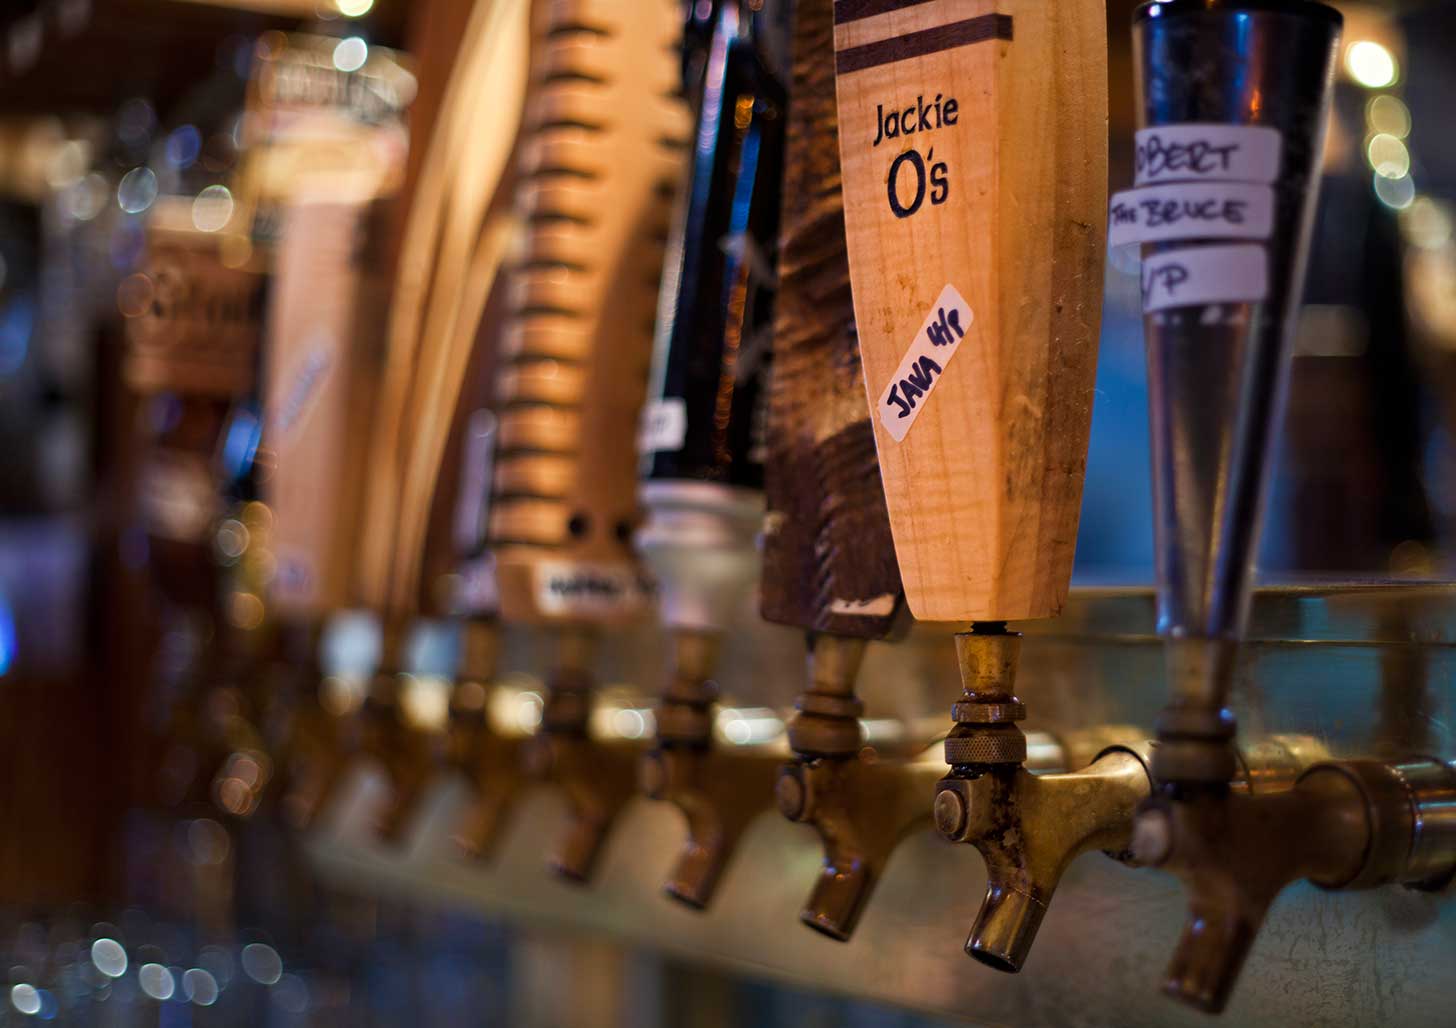 Taps at Jackie Os Brewery - Best Breweries in Ohio